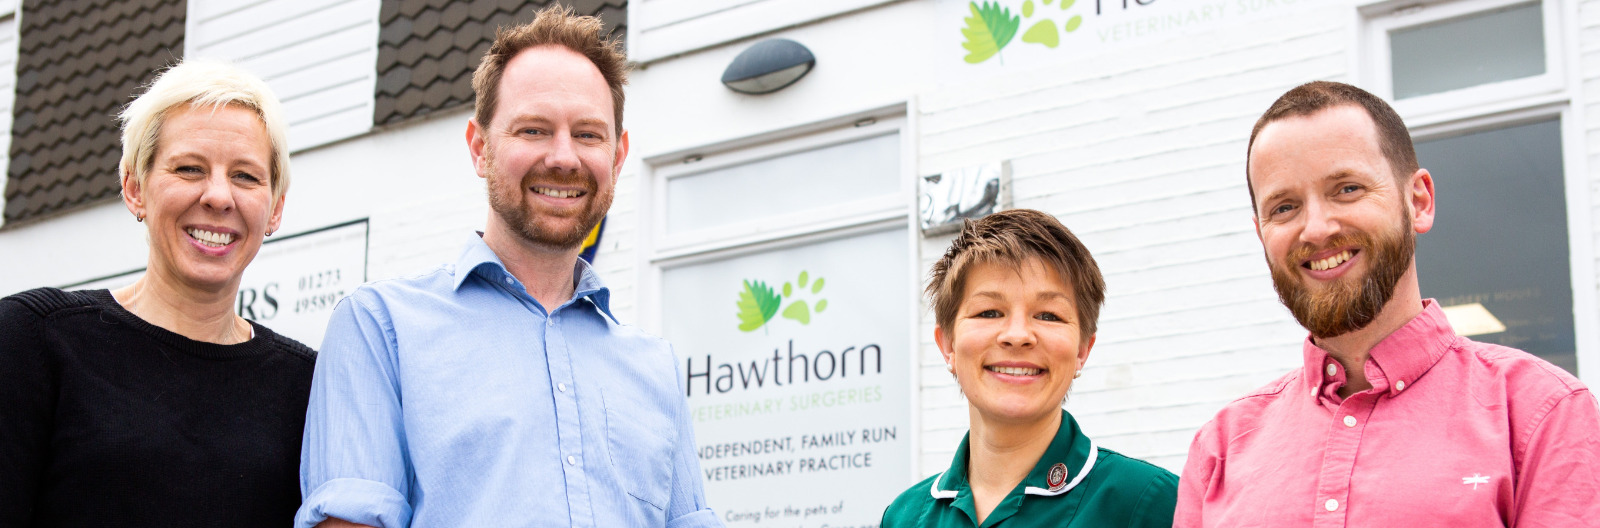 Our Team at Hawthorn Vets